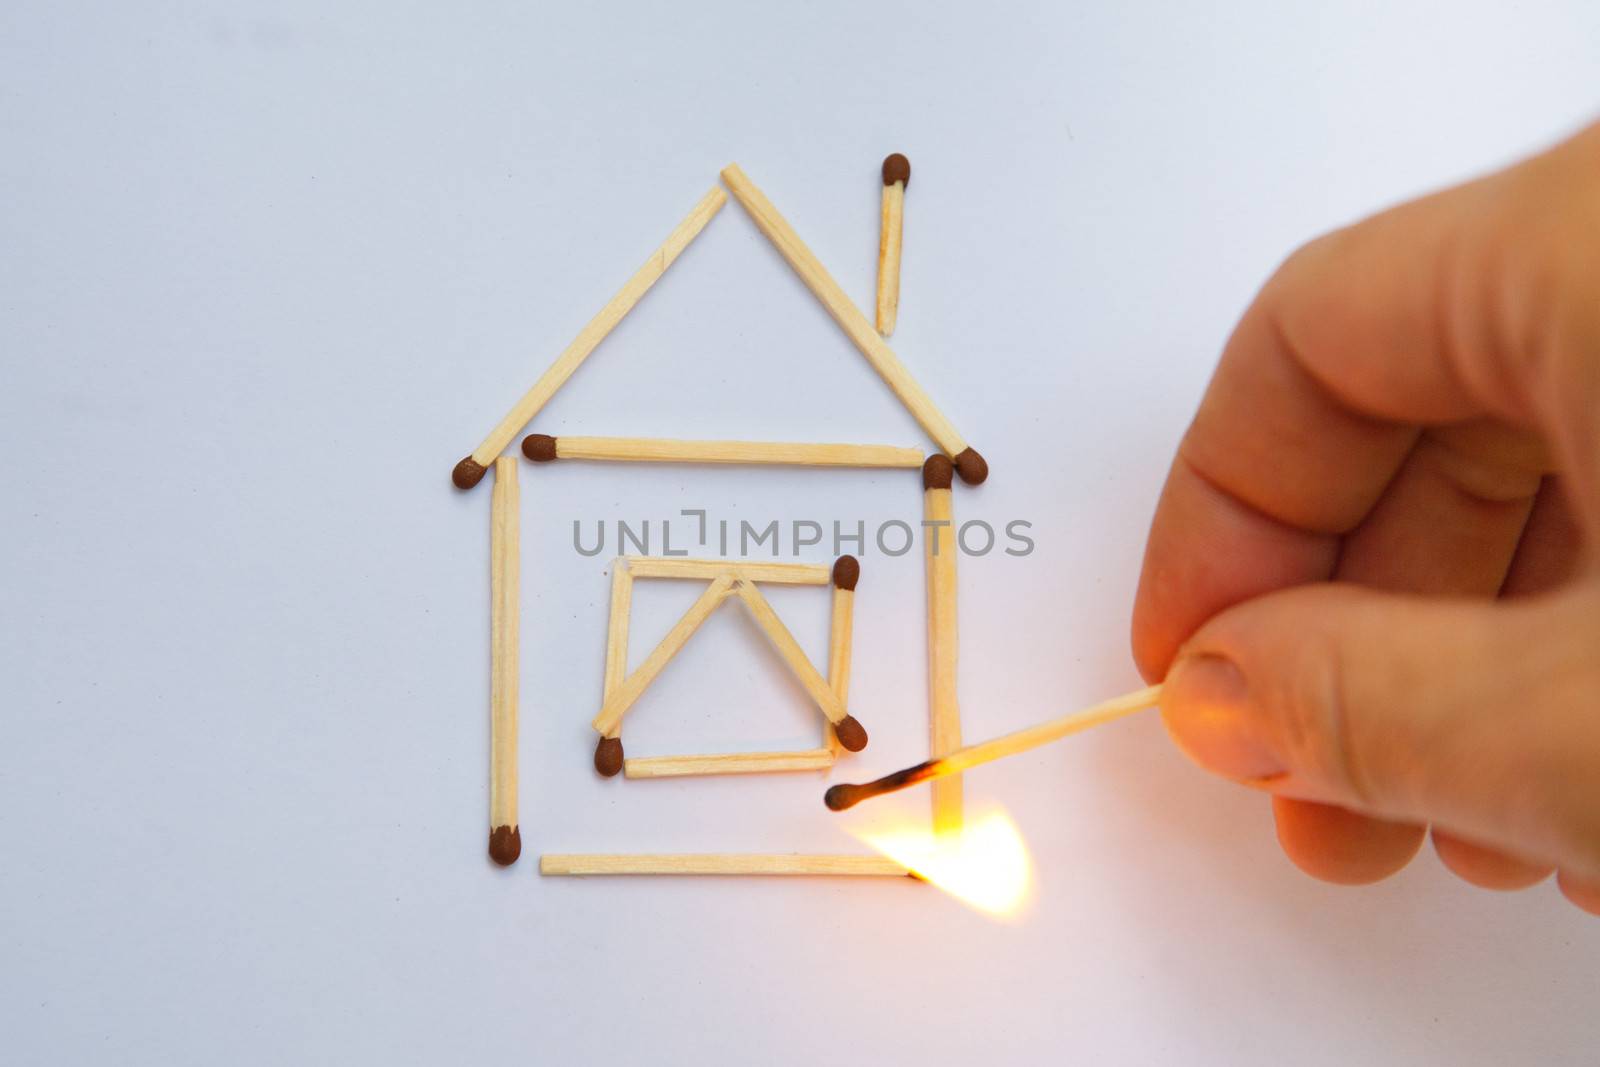 burning match near model of the house